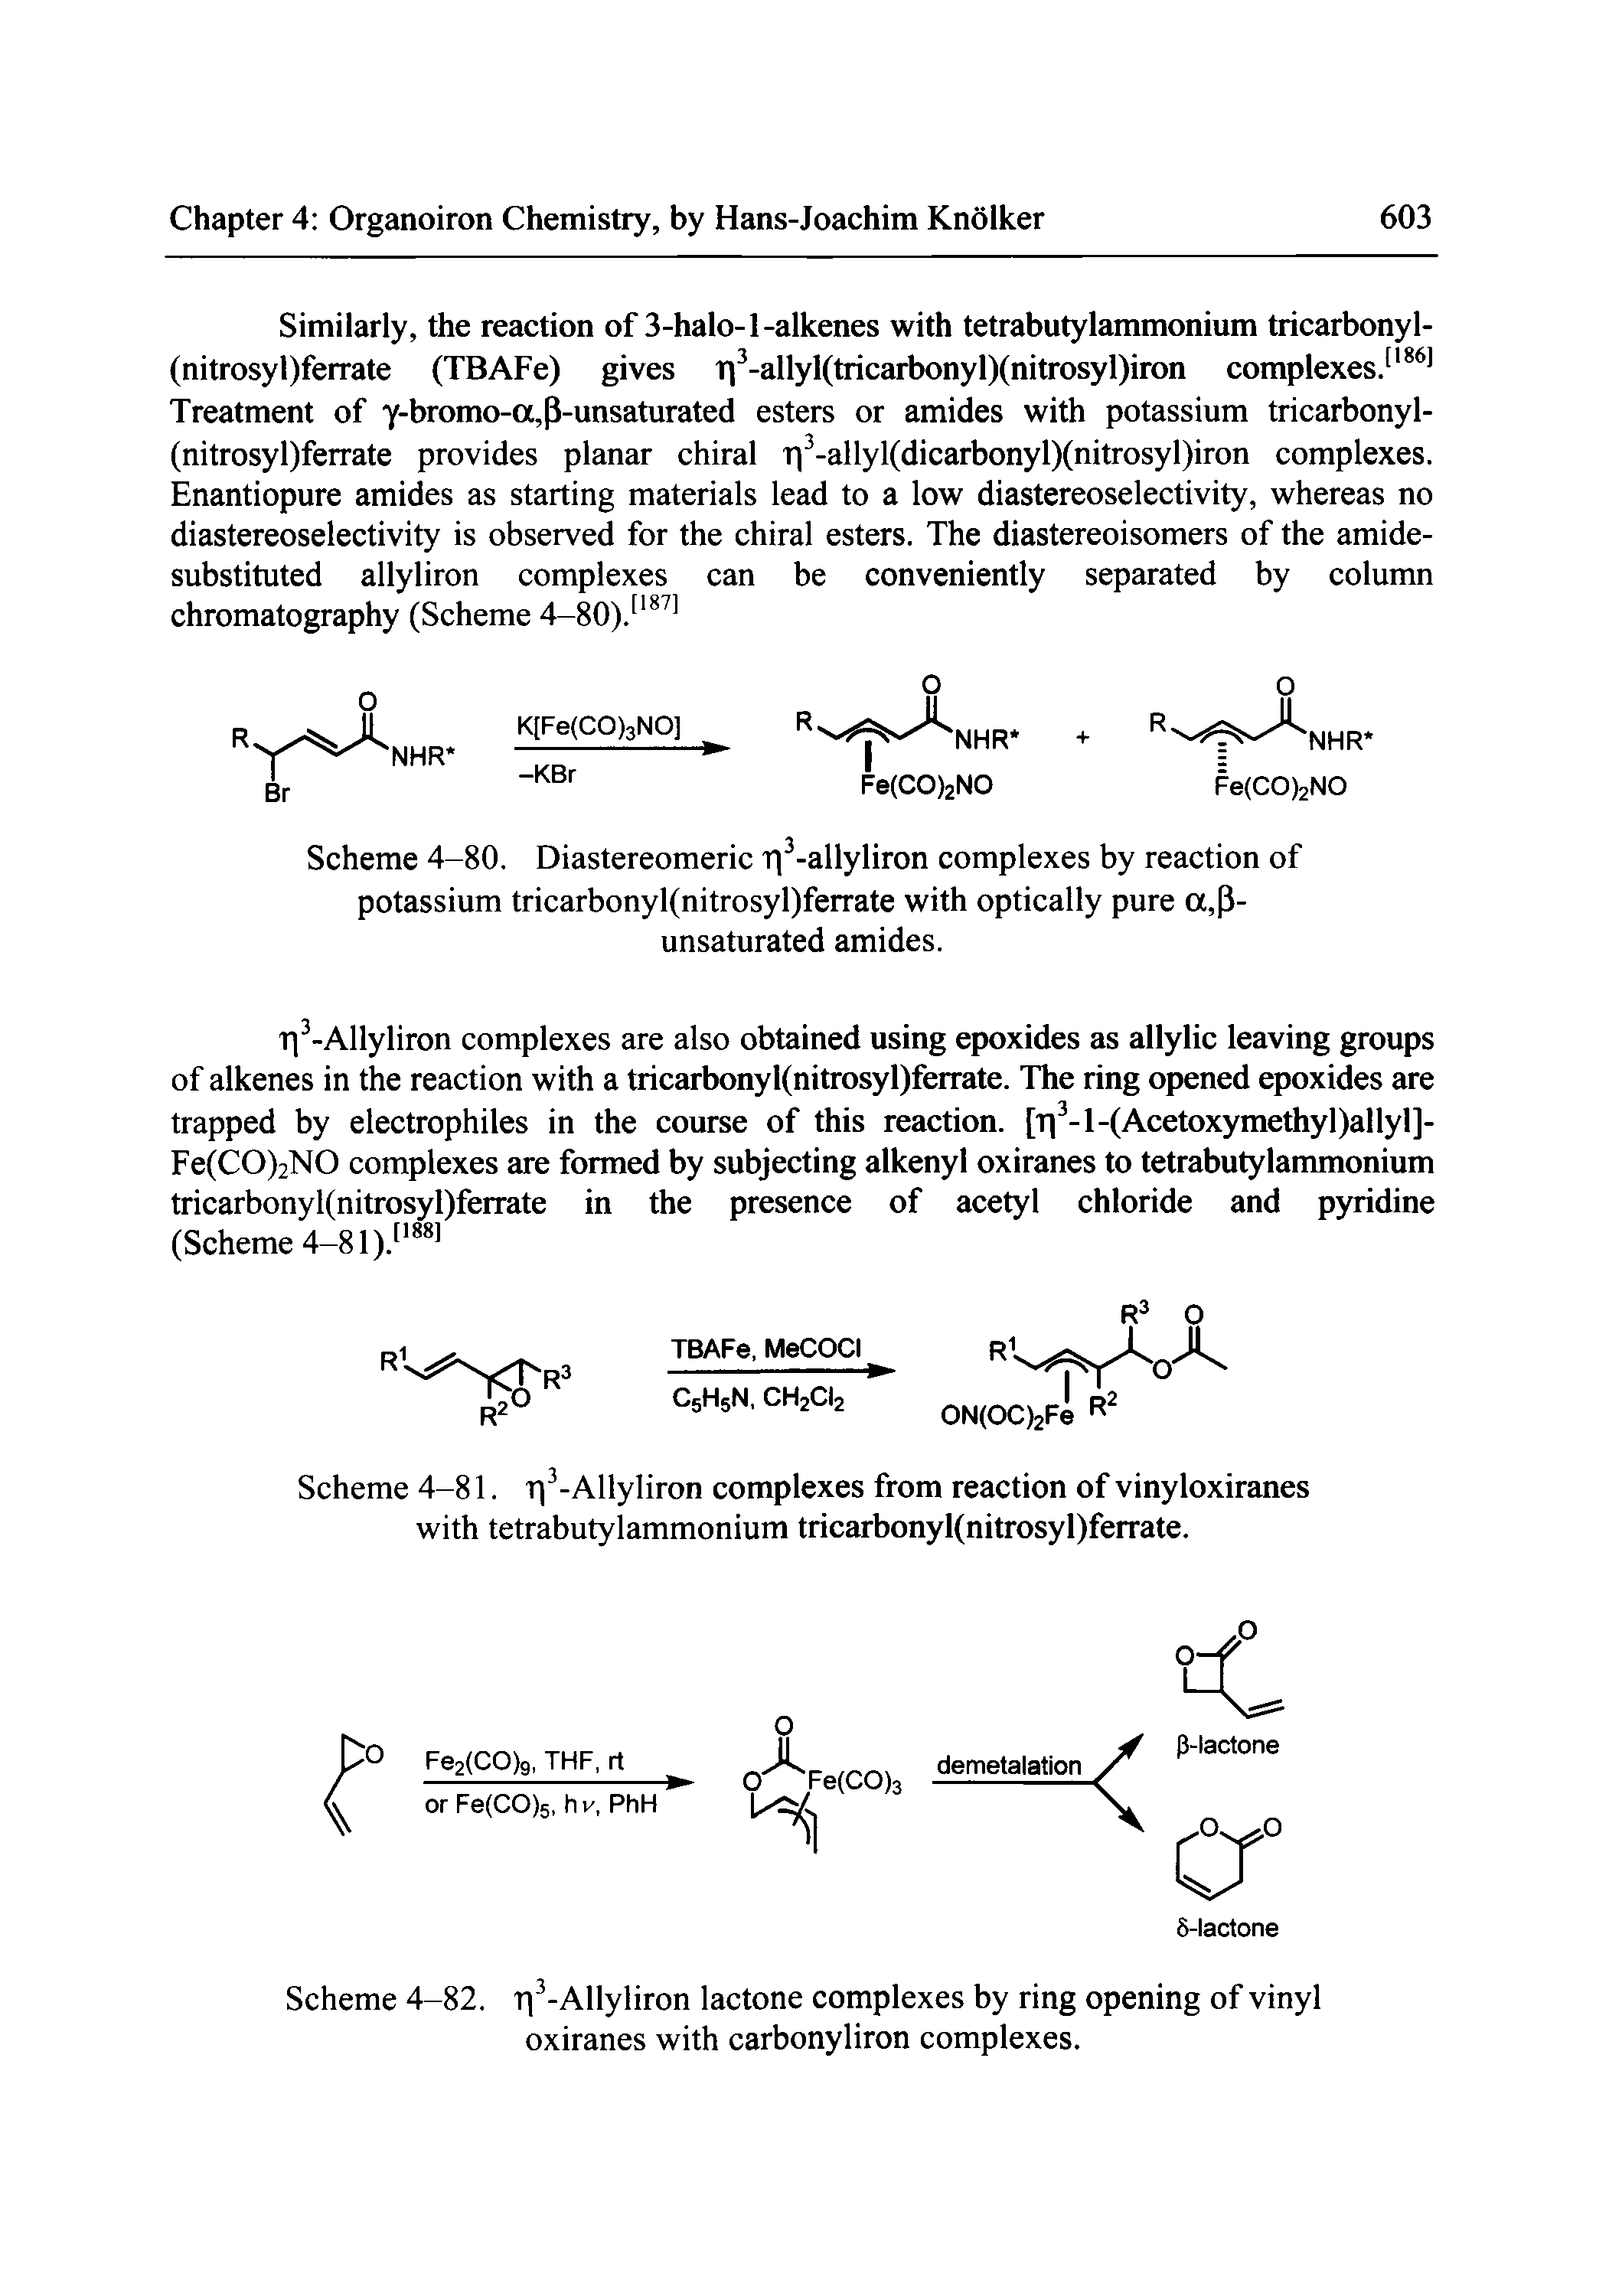 Scheme 4-80. Diastereomeric Tj -allyliron complexes by reaction of potassium tricarbonyl(nitrosyl)ferrate with optically pure a,P-unsaturated amides.